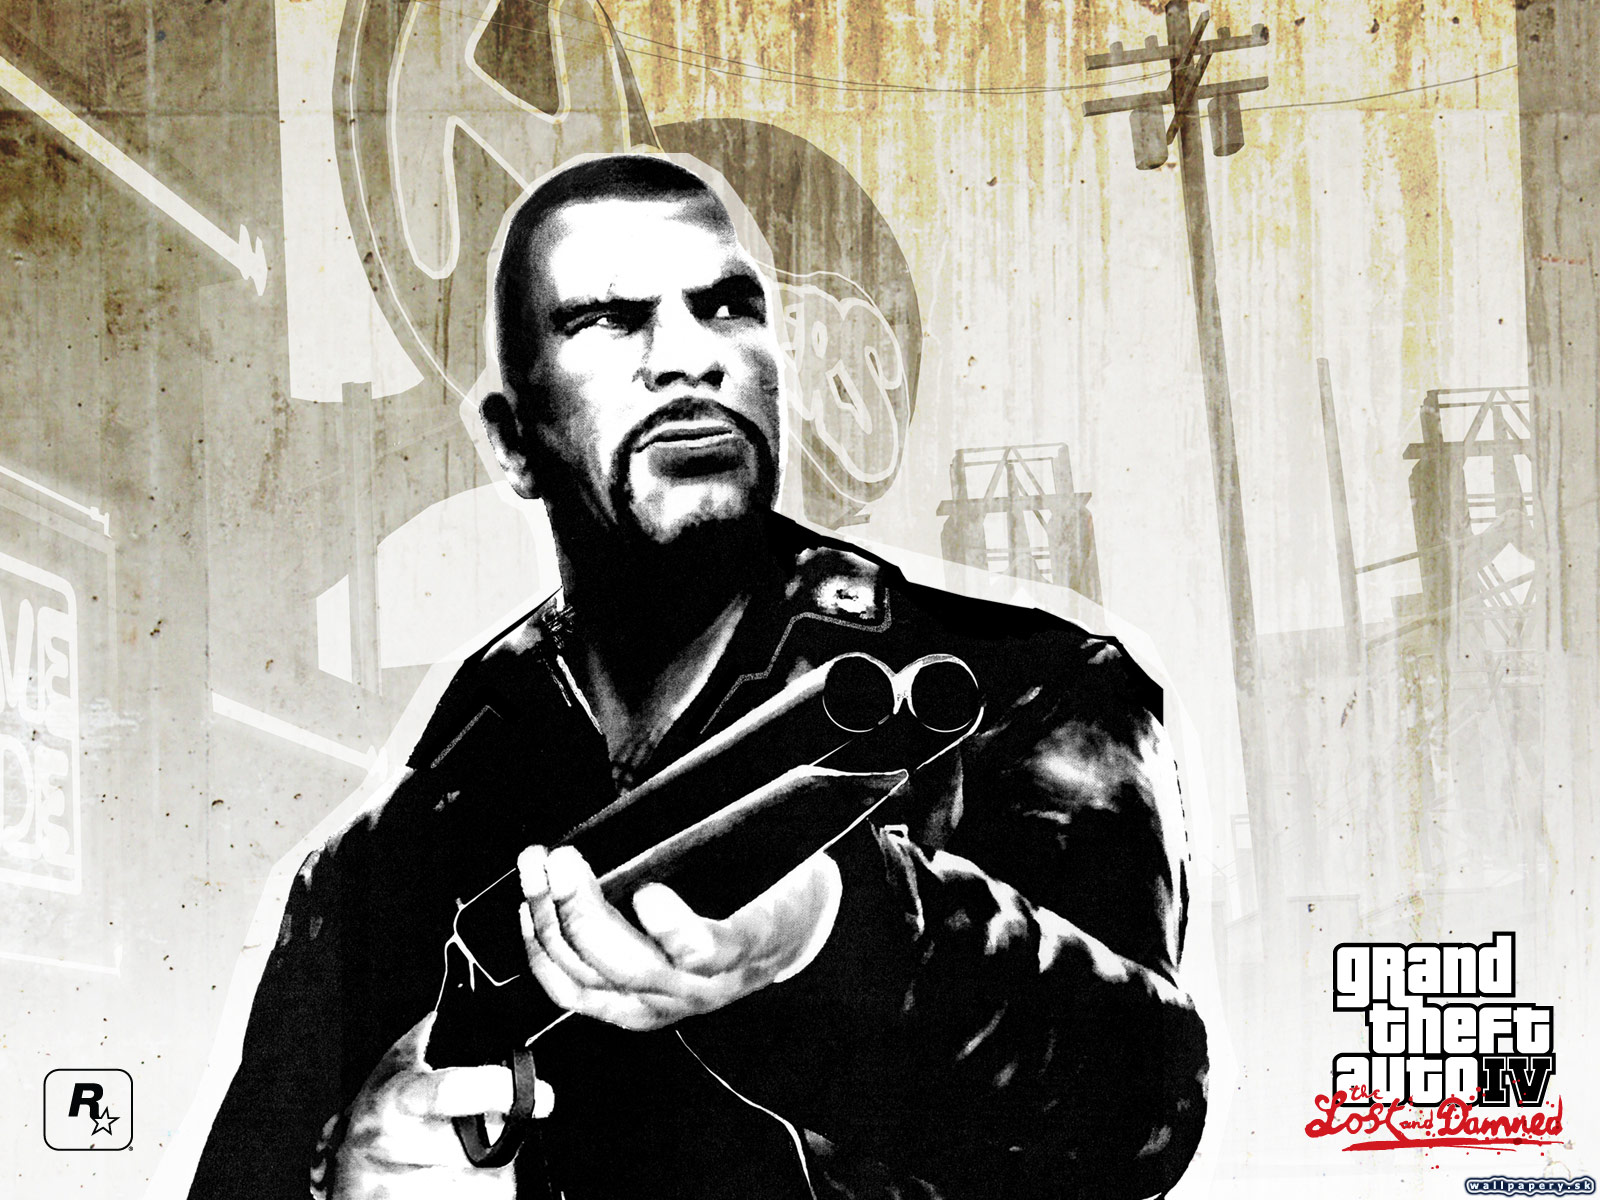 Grand Theft Auto IV: The Lost and Damned - wallpaper 5